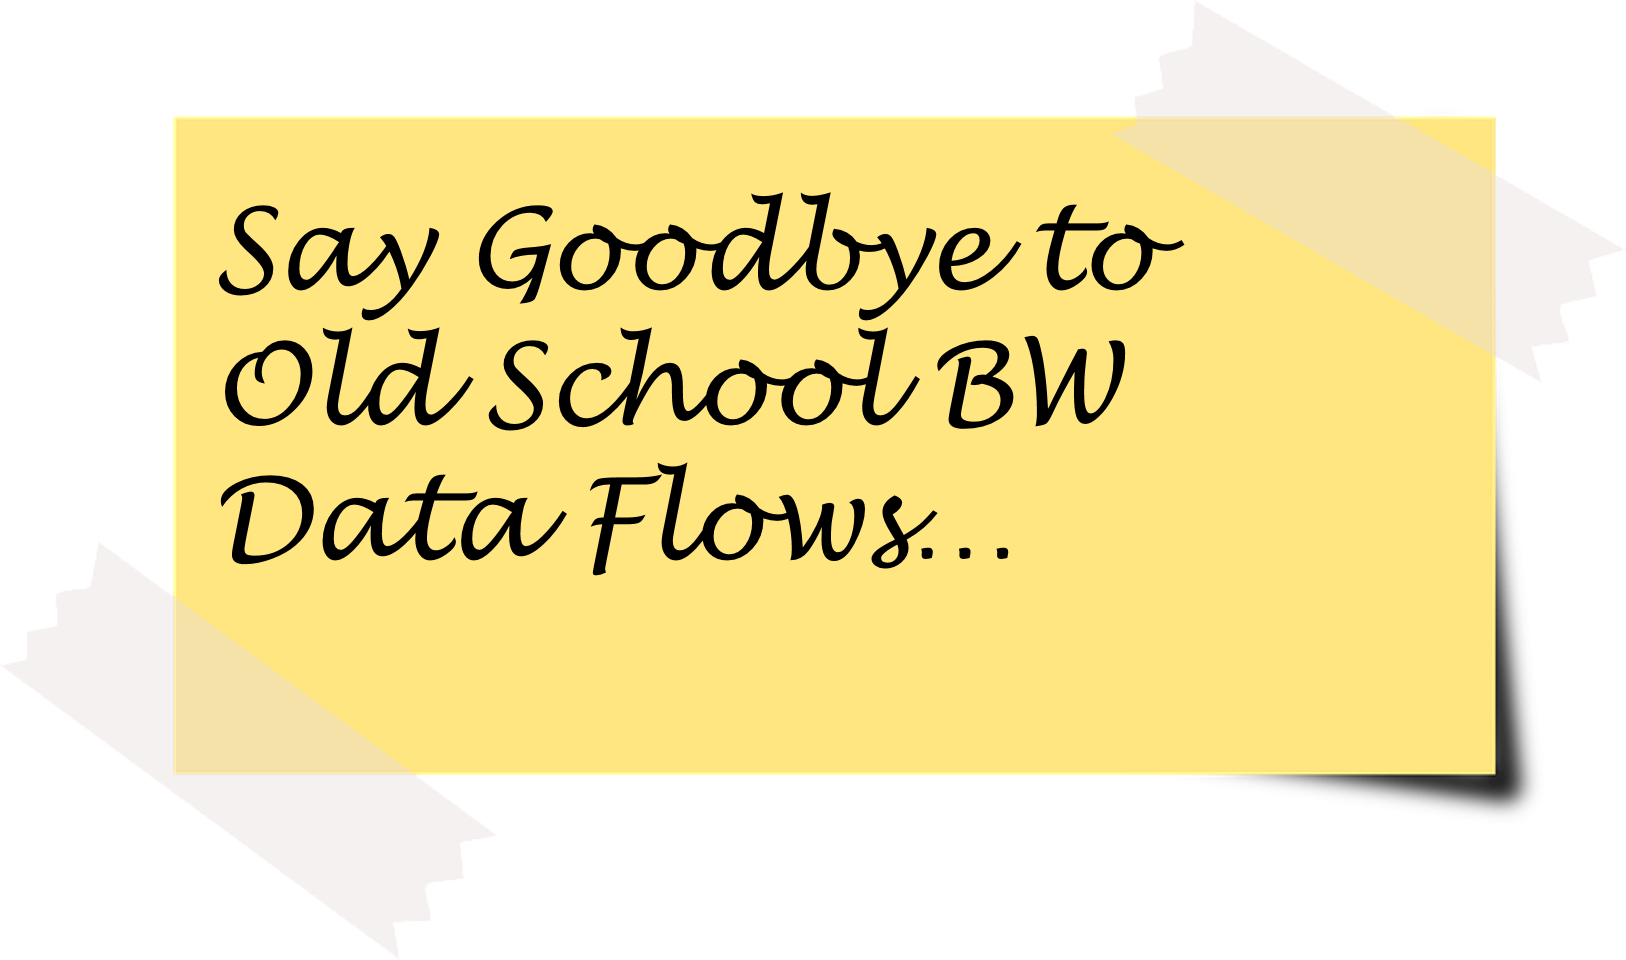 Say goodbye to ‘old school’ BW Data Flows